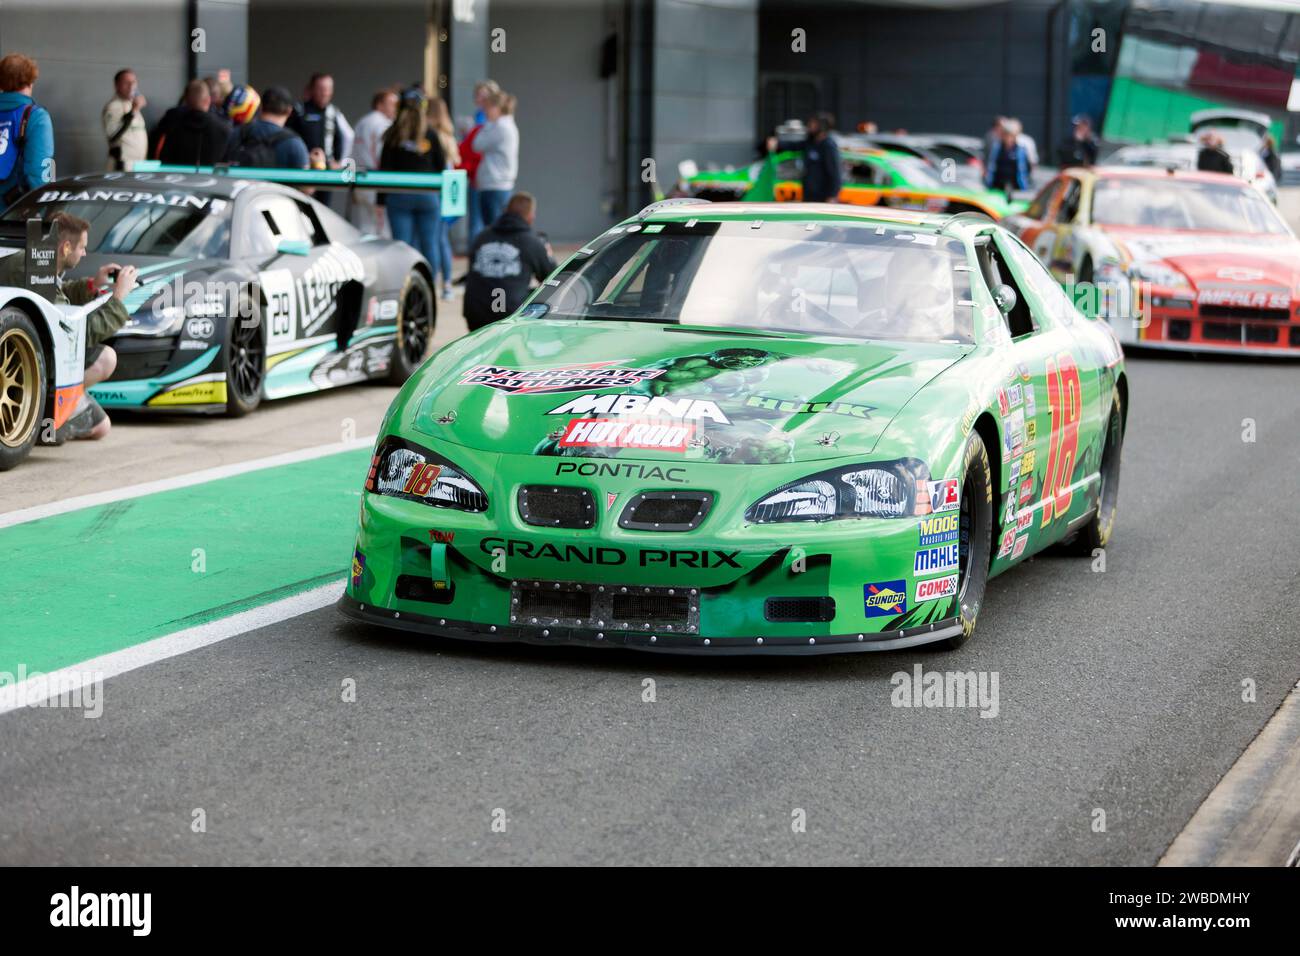 Dave (Bobby) Clark's 1999,  Pontiac Grand Prix, taking part in the 75th Anniversary of Nascar Demonstration, at the 2023 Silverstone Festival Stock Photo